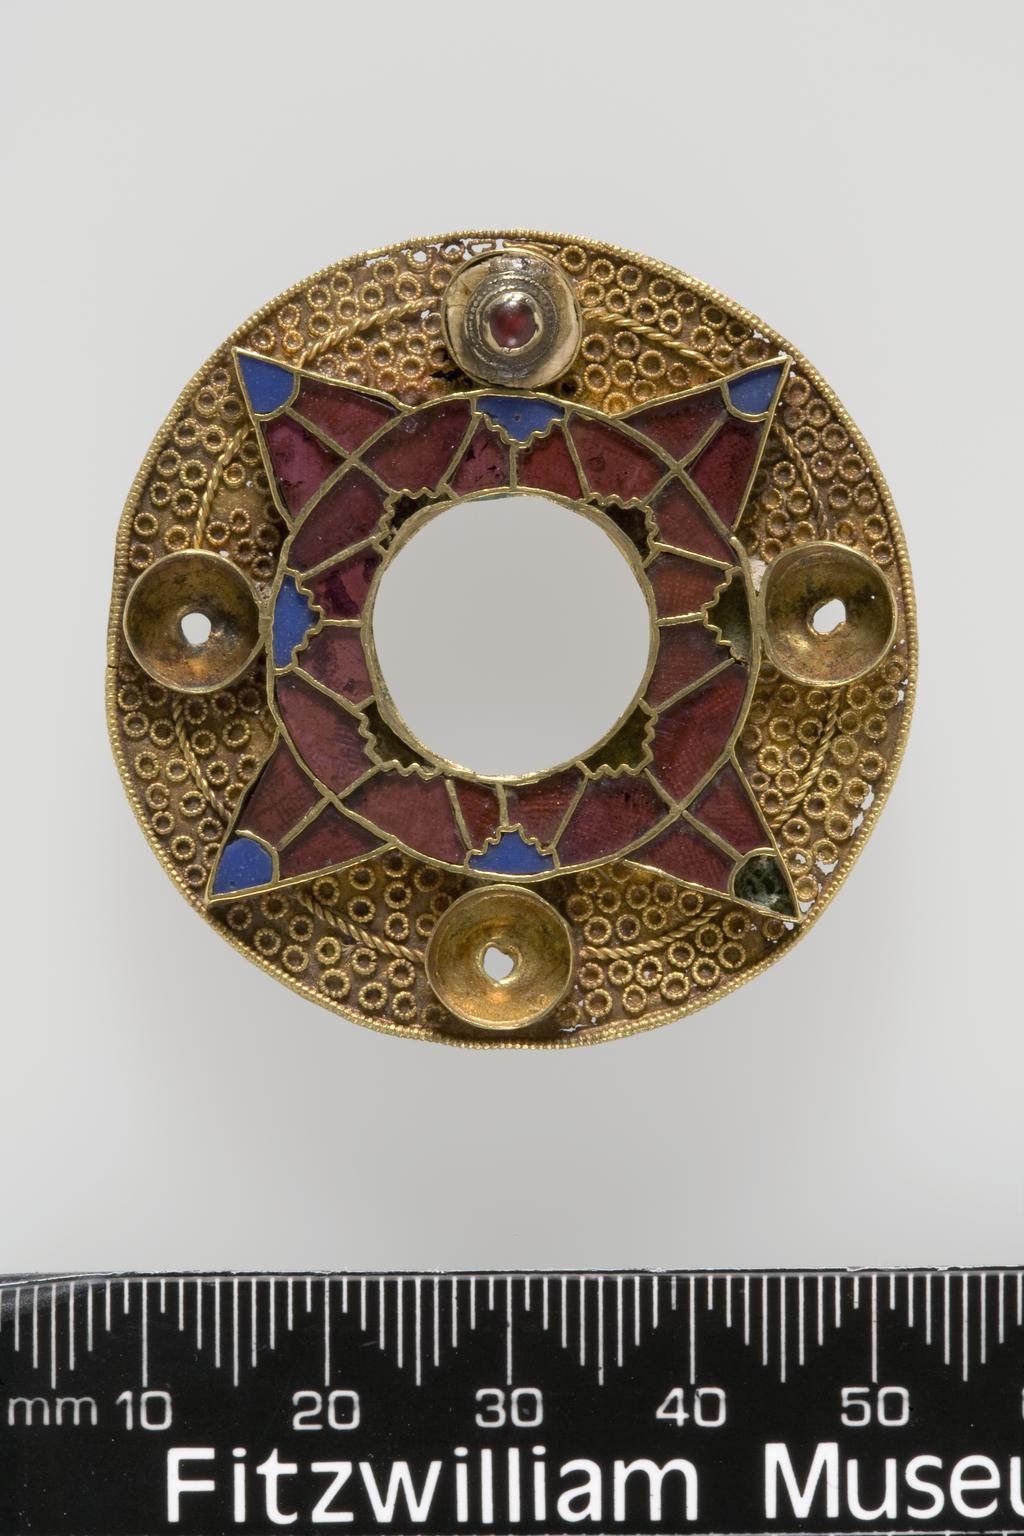 An image of Jewellery/Bracteate. Gold, decorated with a concentric design of stamped chequered triangles, height 3.2cm, depth 2.8cm, circa 500-600. Anglo-Saxon. From 19th century excavations of a cemetery at the King's Field, Faversham, Kent.